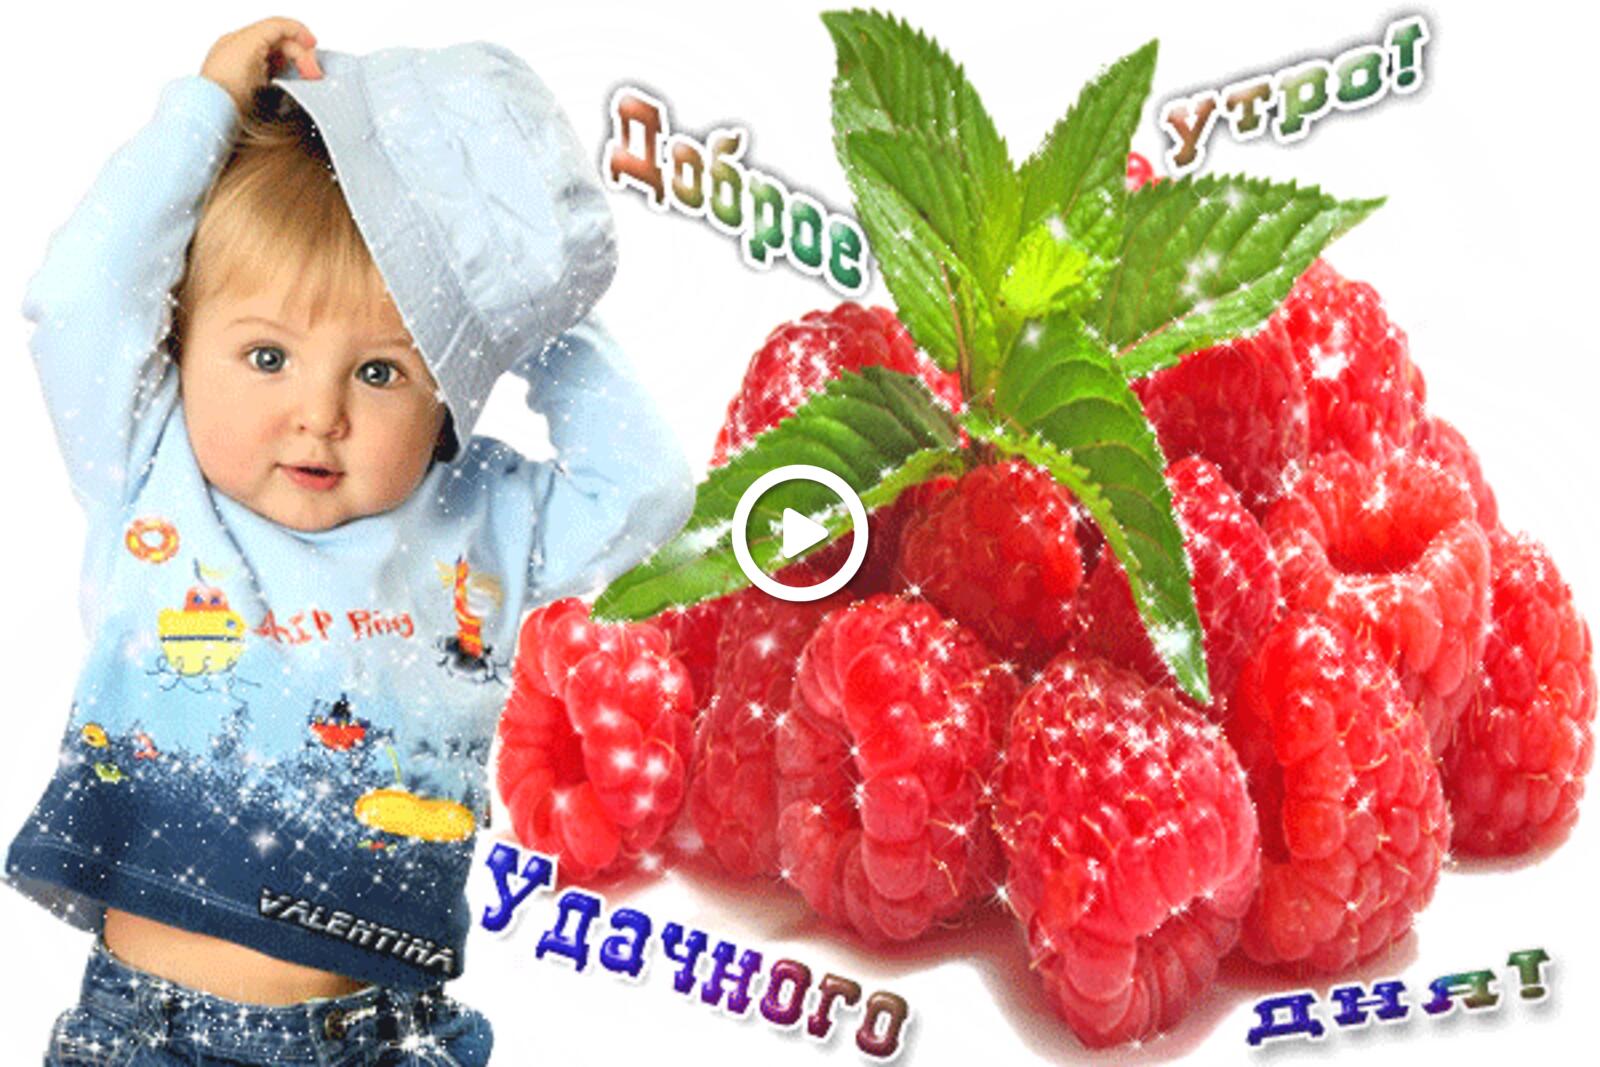 A postcard on the subject of hello animation children berry raspberry for free